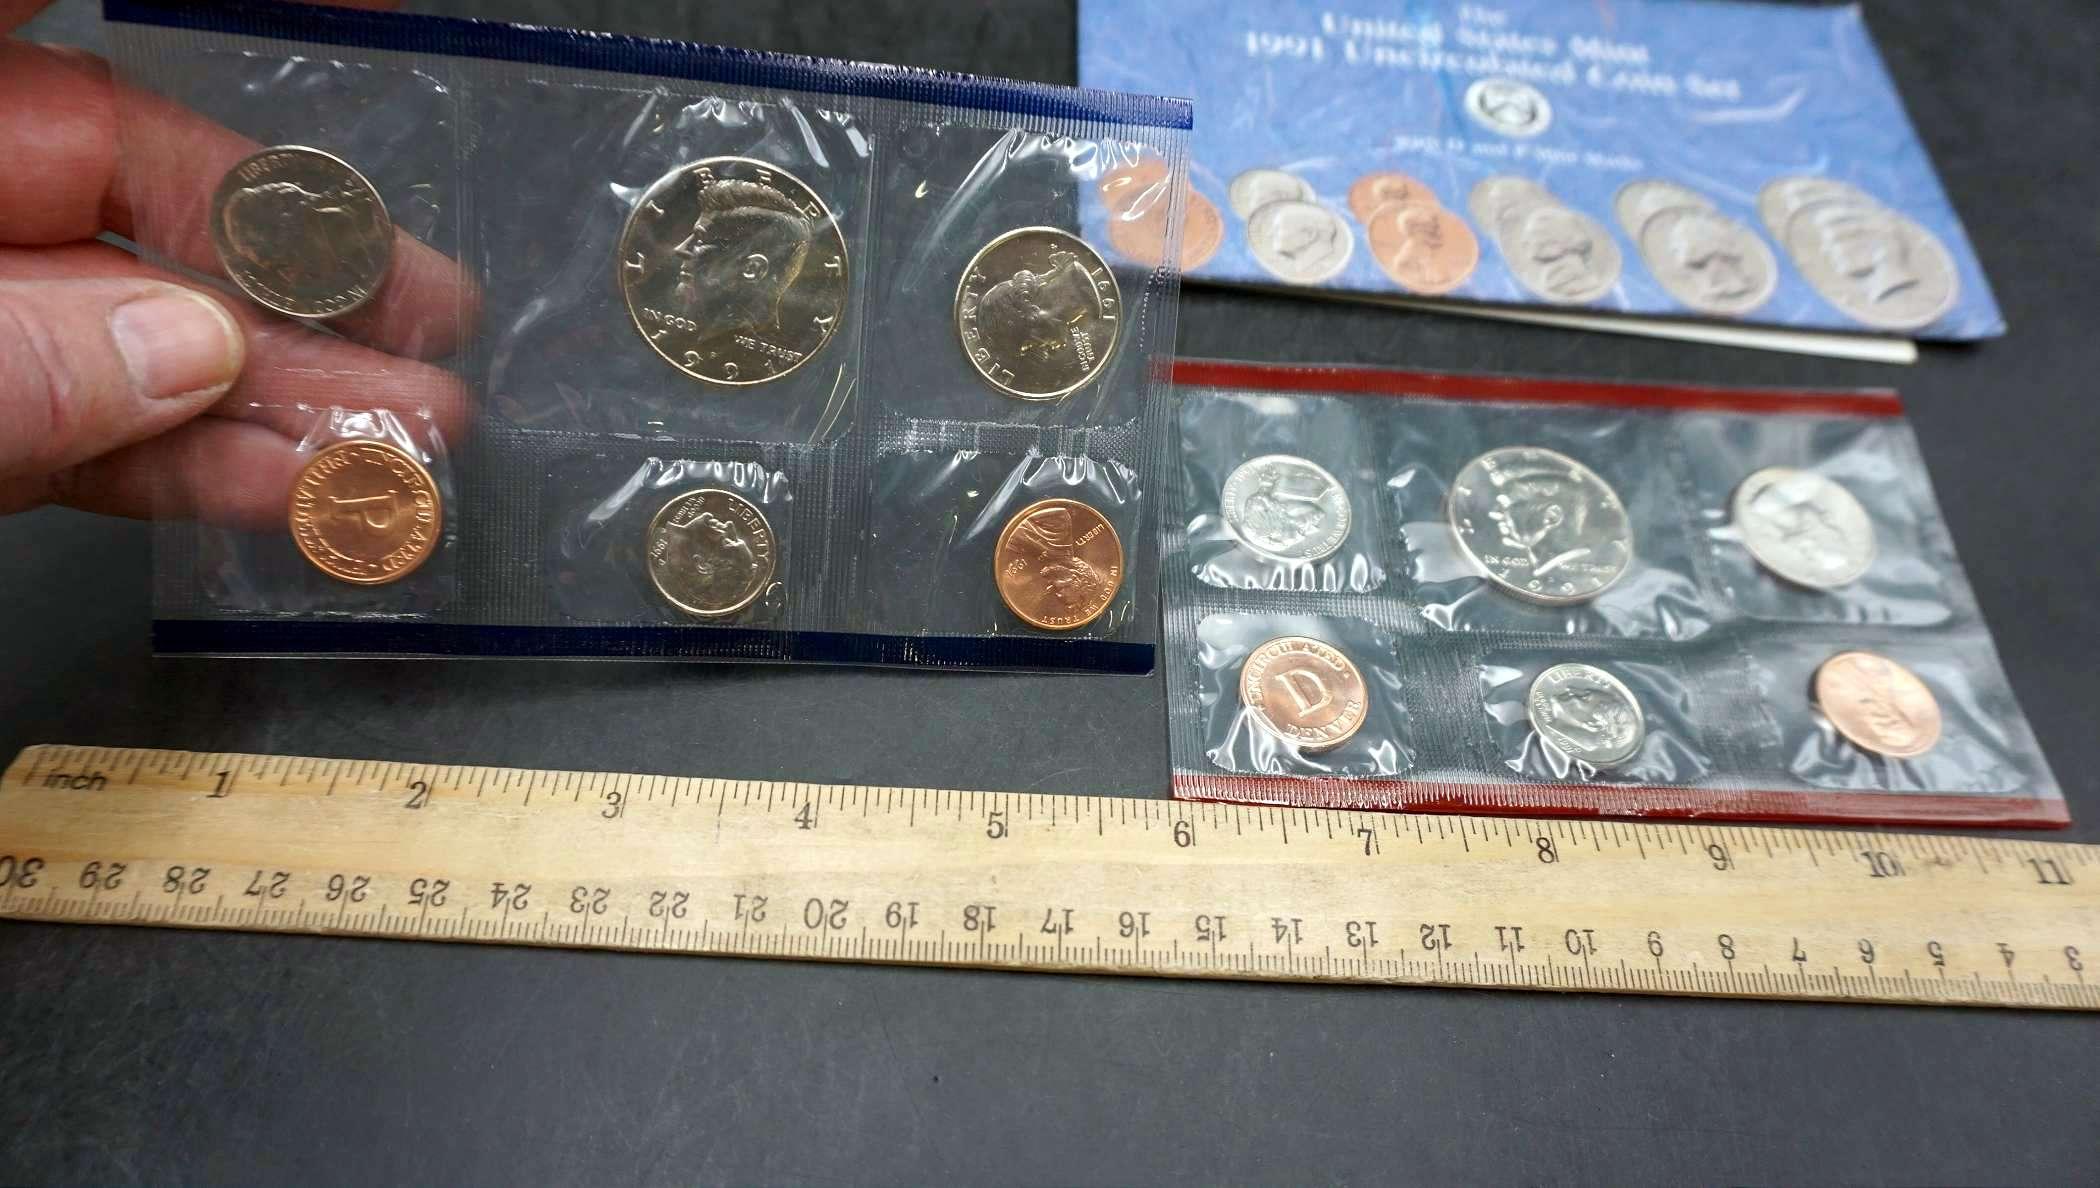 The 1991 U.S. Mint Uncirculated Coin Set